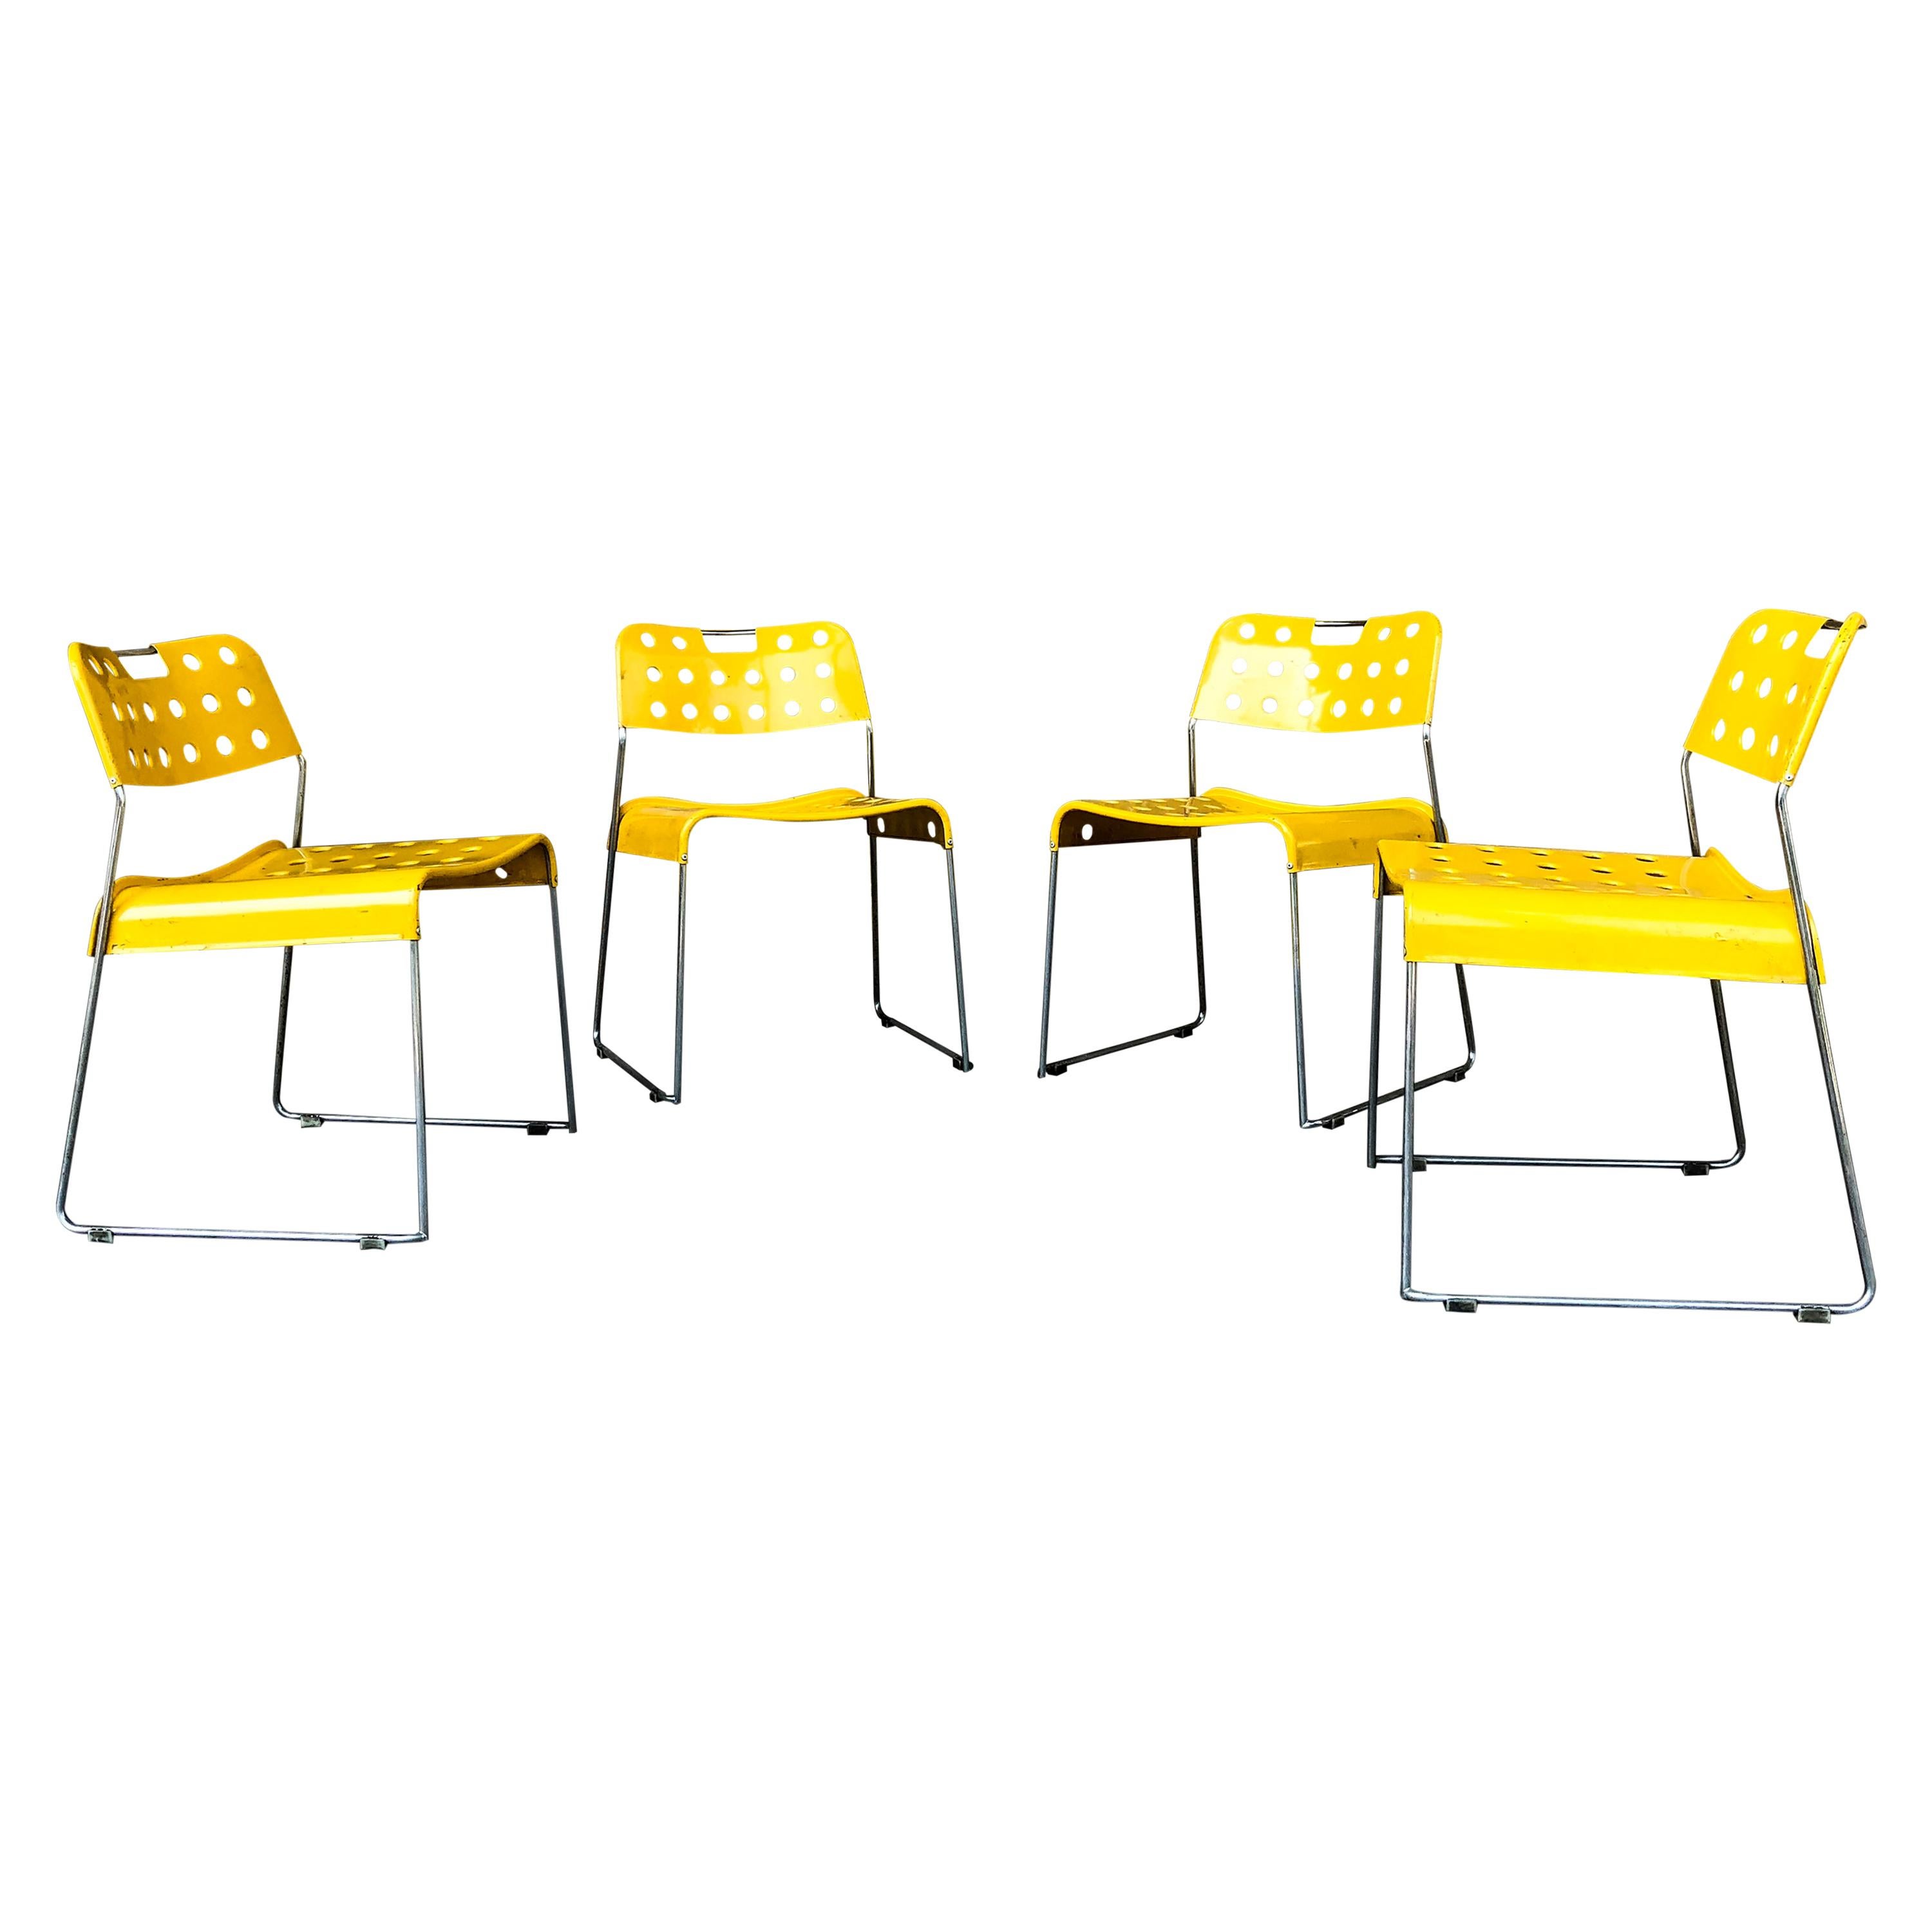 Rodney Kinsman Space Age Yellow Omstak Chair for Bieffeplast, 1971, Set of 10 For Sale 4